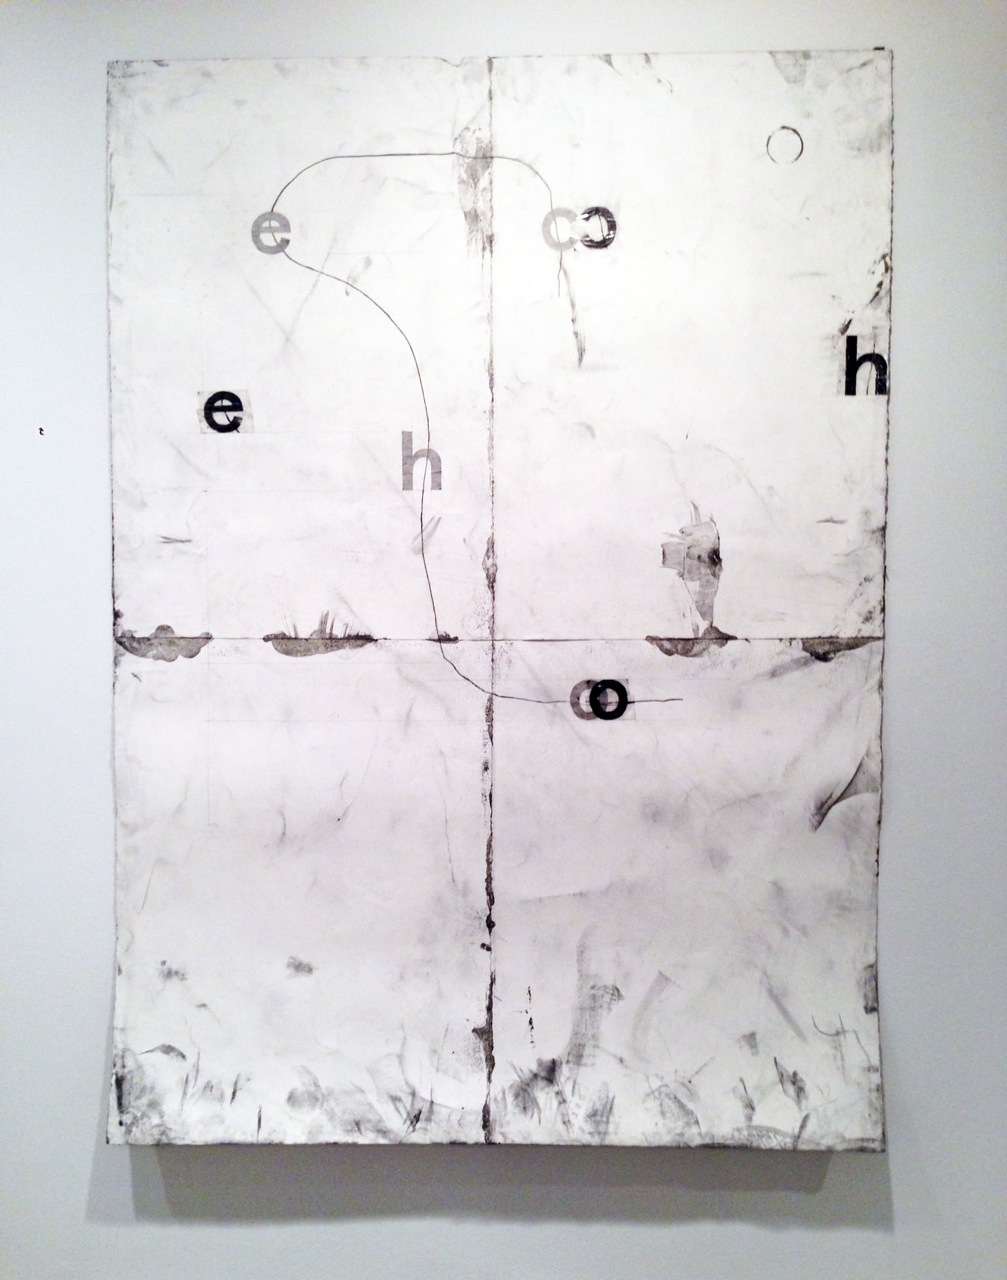 Tony Lewis, ceho (ceho), 2013 (curated by Michelle Grabner)